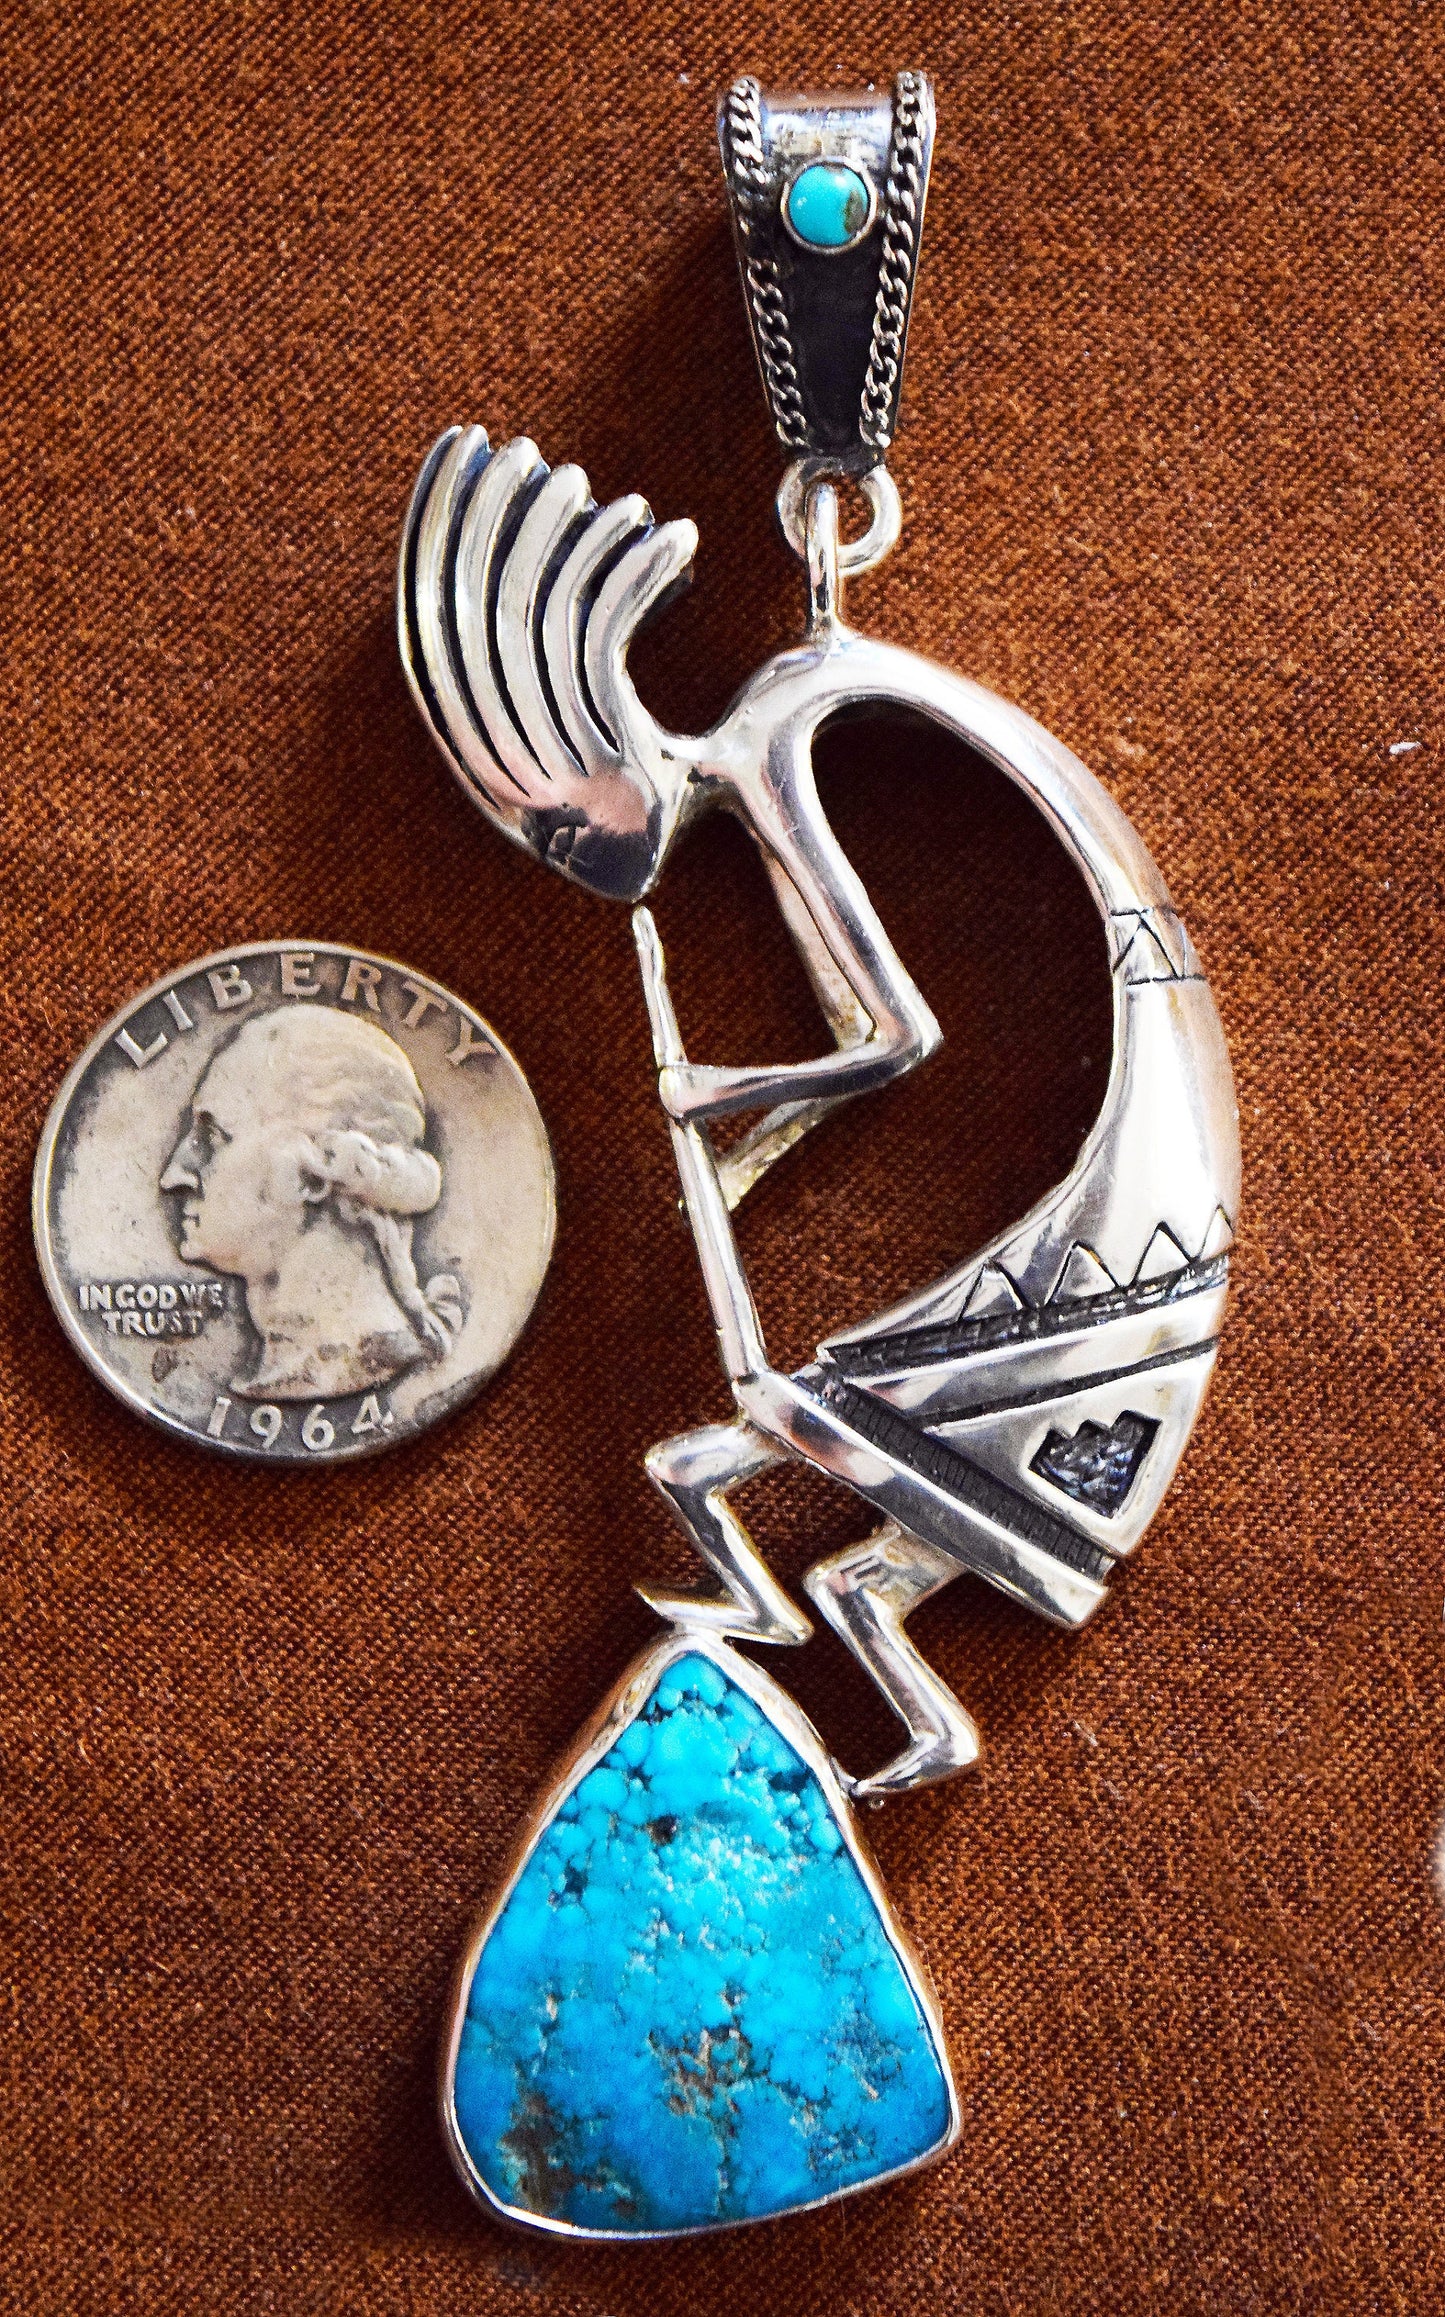 Kokopelli dances to the top of Turquoise Mountain! Featuring a 15.3 carat, natural, untreated, Sleeping Beauty Turquoise Gem!